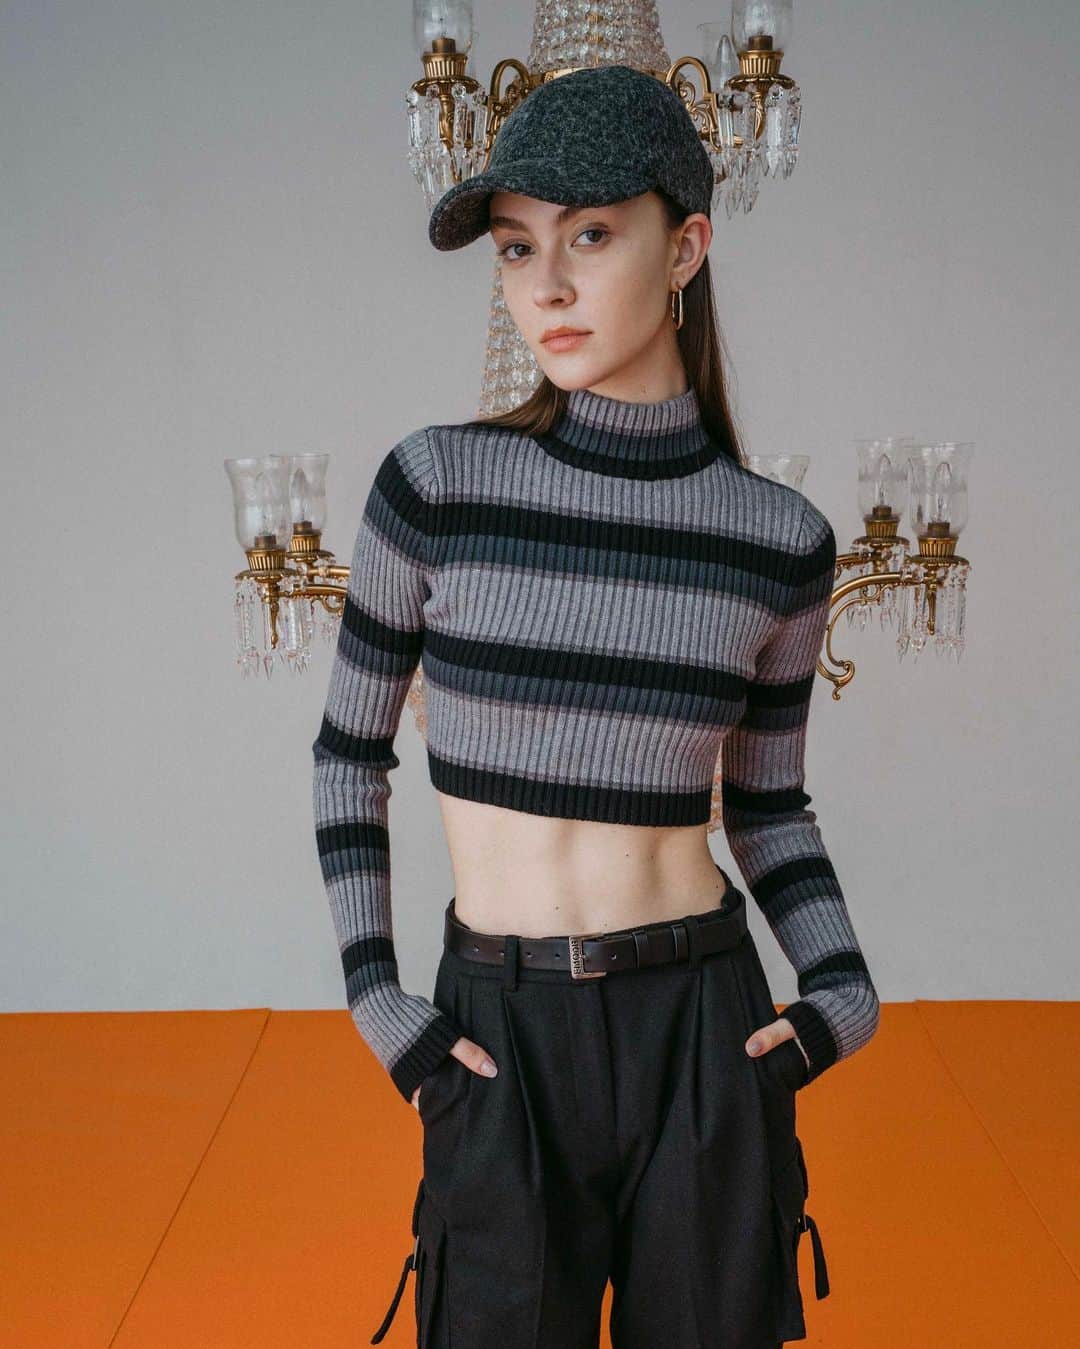 EMODAさんのインスタグラム写真 - (EMODAInstagram)「ㅤㅤㅤㅤㅤㅤㅤㅤㅤㅤㅤㅤ '23 autumn&winter September new item ㅤㅤㅤ  ・HIGH NECK CROP KNIT ￥ 5,940 tax'in ・TWO TUCK WIDE CARGO PT ￥ 9,790 tax'in ・W POCKET OPEN COLLAR OP ￥ 9,790 tax'in ・SQUARE LOGO BUCKLE BELT ￥ 4,950 tax'in ・SIDE GORE BOOTS ￥ 14,080 tax'in ・DEFORMATION CIRCLE PIERCE ￥ 2,970 tax'in ・TWEED BASEBALL CAP ￥ 5,390 tax'in ＿＿＿＿＿＿＿＿＿＿＿＿＿＿＿＿＿＿＿＿＿＿＿＿ ≪AUTUMN FAIR≫  ■PRE ORDER POINT×10&送料無料 >9/29(fri)12:00-10/3(tue)23:59 最新アイテムポイント10倍還元。次回も更にお得に!!  ■OUTER ALL10%OFF >9/29(fri)12:00-10/3(tue)23:59 秋の行楽シーズンに合わせて最新アウターをお得にGET!! ＿＿＿＿＿＿＿＿＿＿＿＿＿＿＿＿＿＿＿＿＿＿＿＿ 詳細は( @emoda_official )のTOPのURL,storiesチェック✔️ㅤㅤ ㅤㅤㅤ ㅤㅤㅤㅤㅤ ㅤㅤㅤㅤㅤ ㅤㅤㅤㅤ #EMODA #EMODA_SHOES #boots #ブーツ #サイドゴアブーツ #ロングシャツ #シャツワンピース #ワークパンツ #カーゴパンツ #クロップドニット #キャップ #ブラックコーデ #RUNWAYchannel #2023AW #autumn @emoda_snap」9月30日 22時11分 - emoda_official